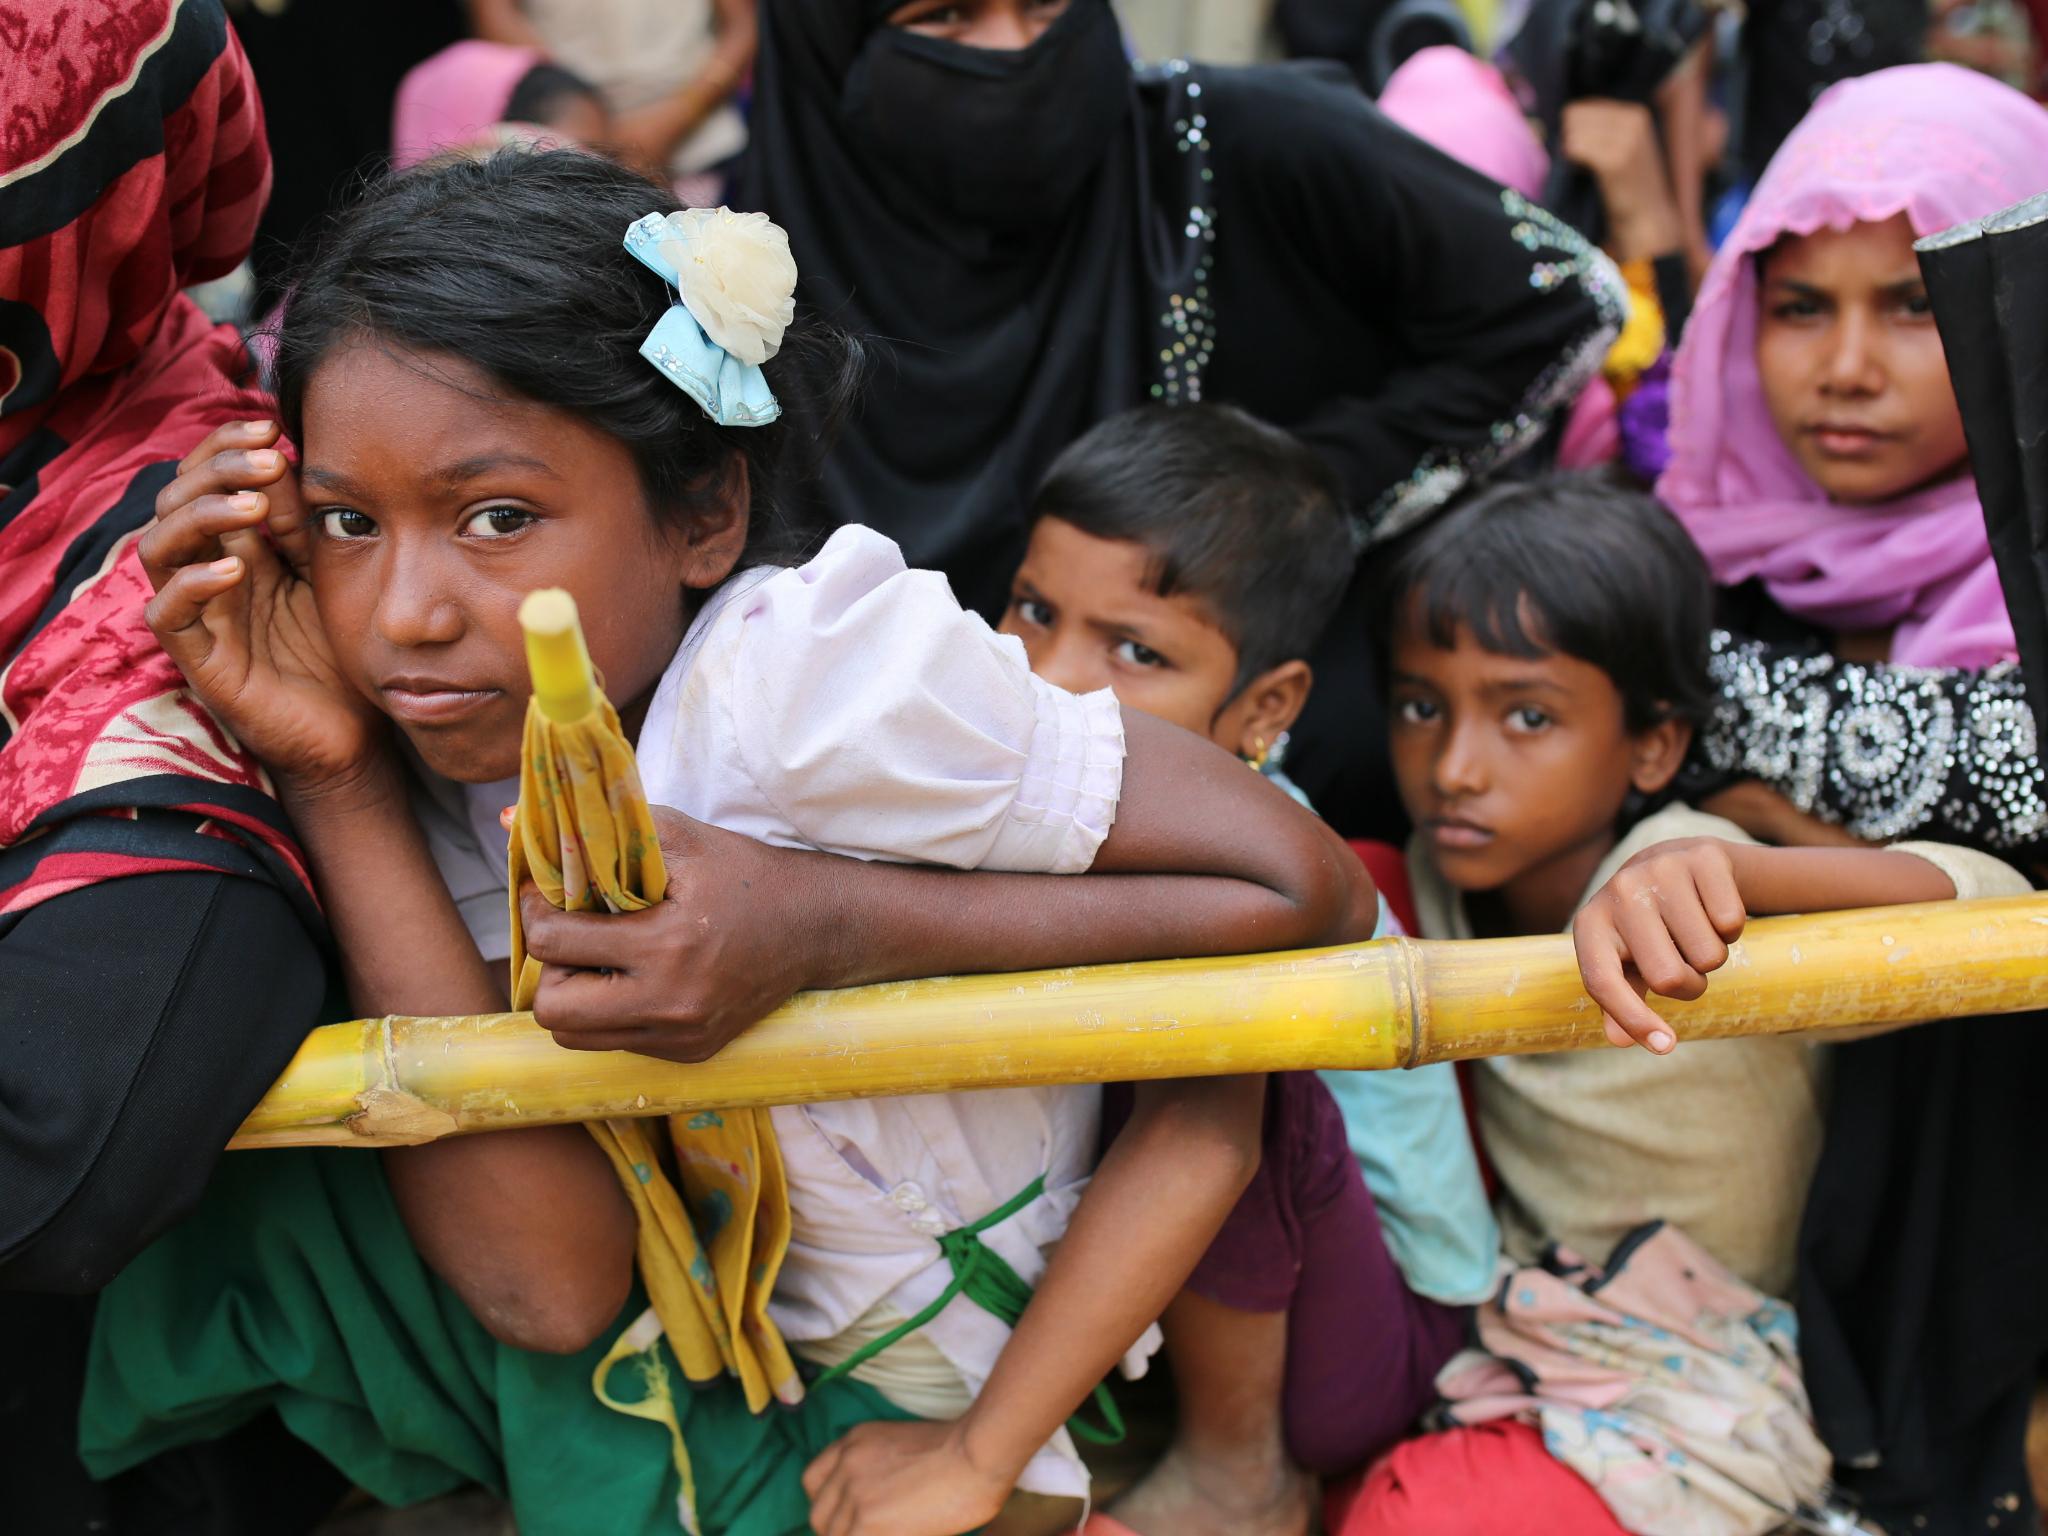 Rohingya children wait for food handouts at Thangkhali refugee camp in Cox's Bazar, Bangladesh, 5 October 2017.